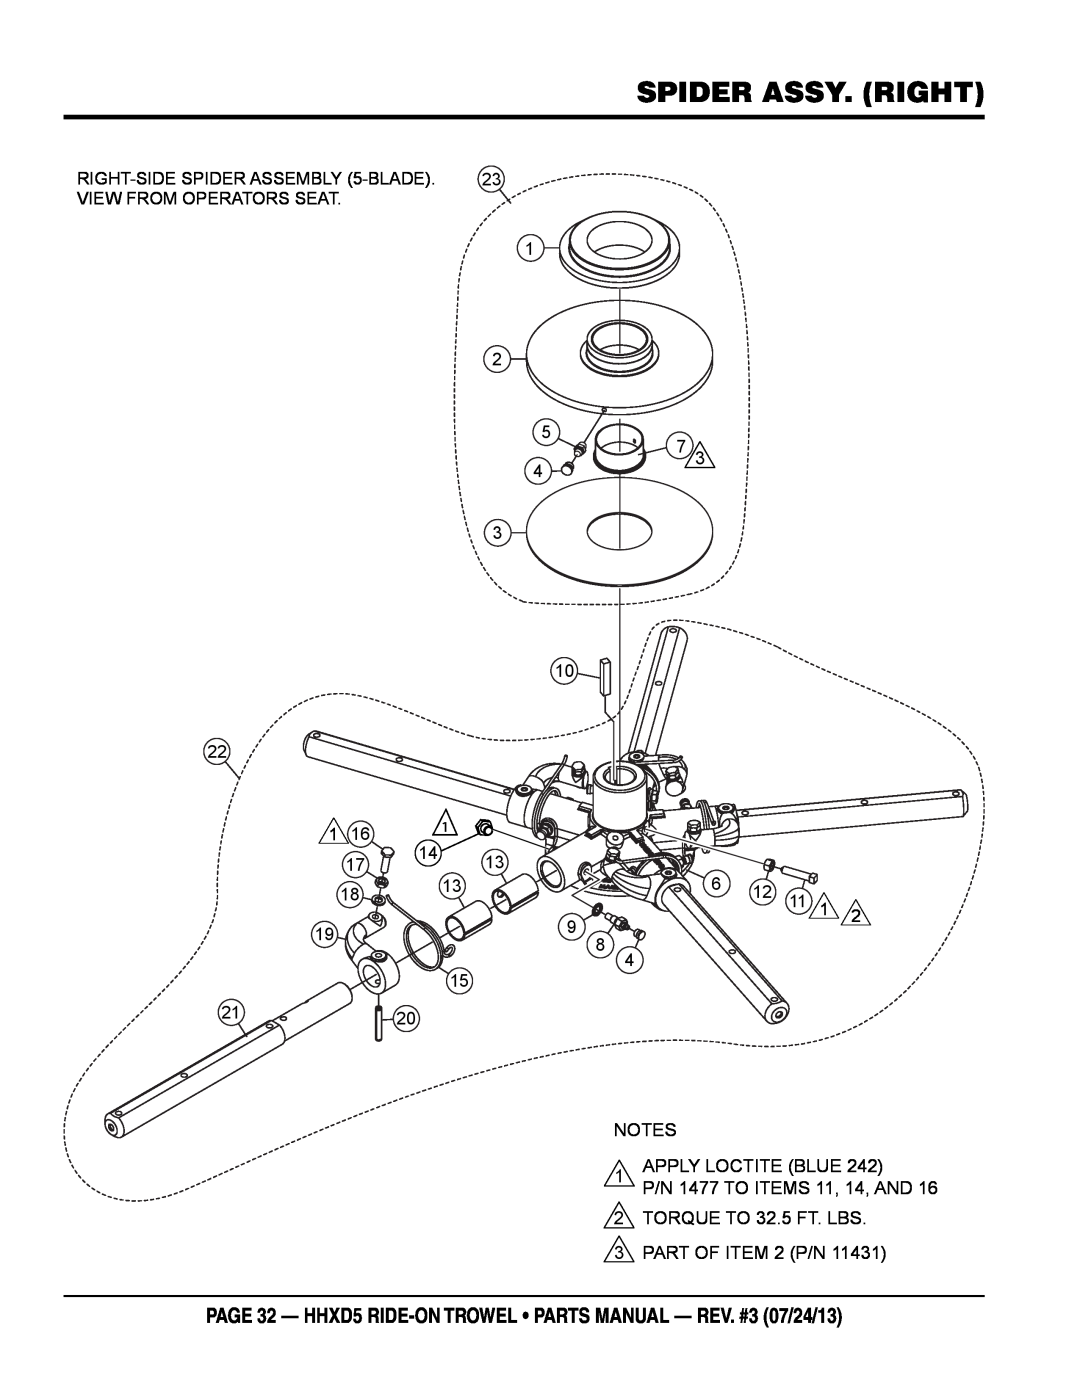 Multiquip HHSD5 spider assy. RIGHT, page 32 - HHXD5 RIDE-ON TROWEL parts manual - rev. #3 07/24/13 